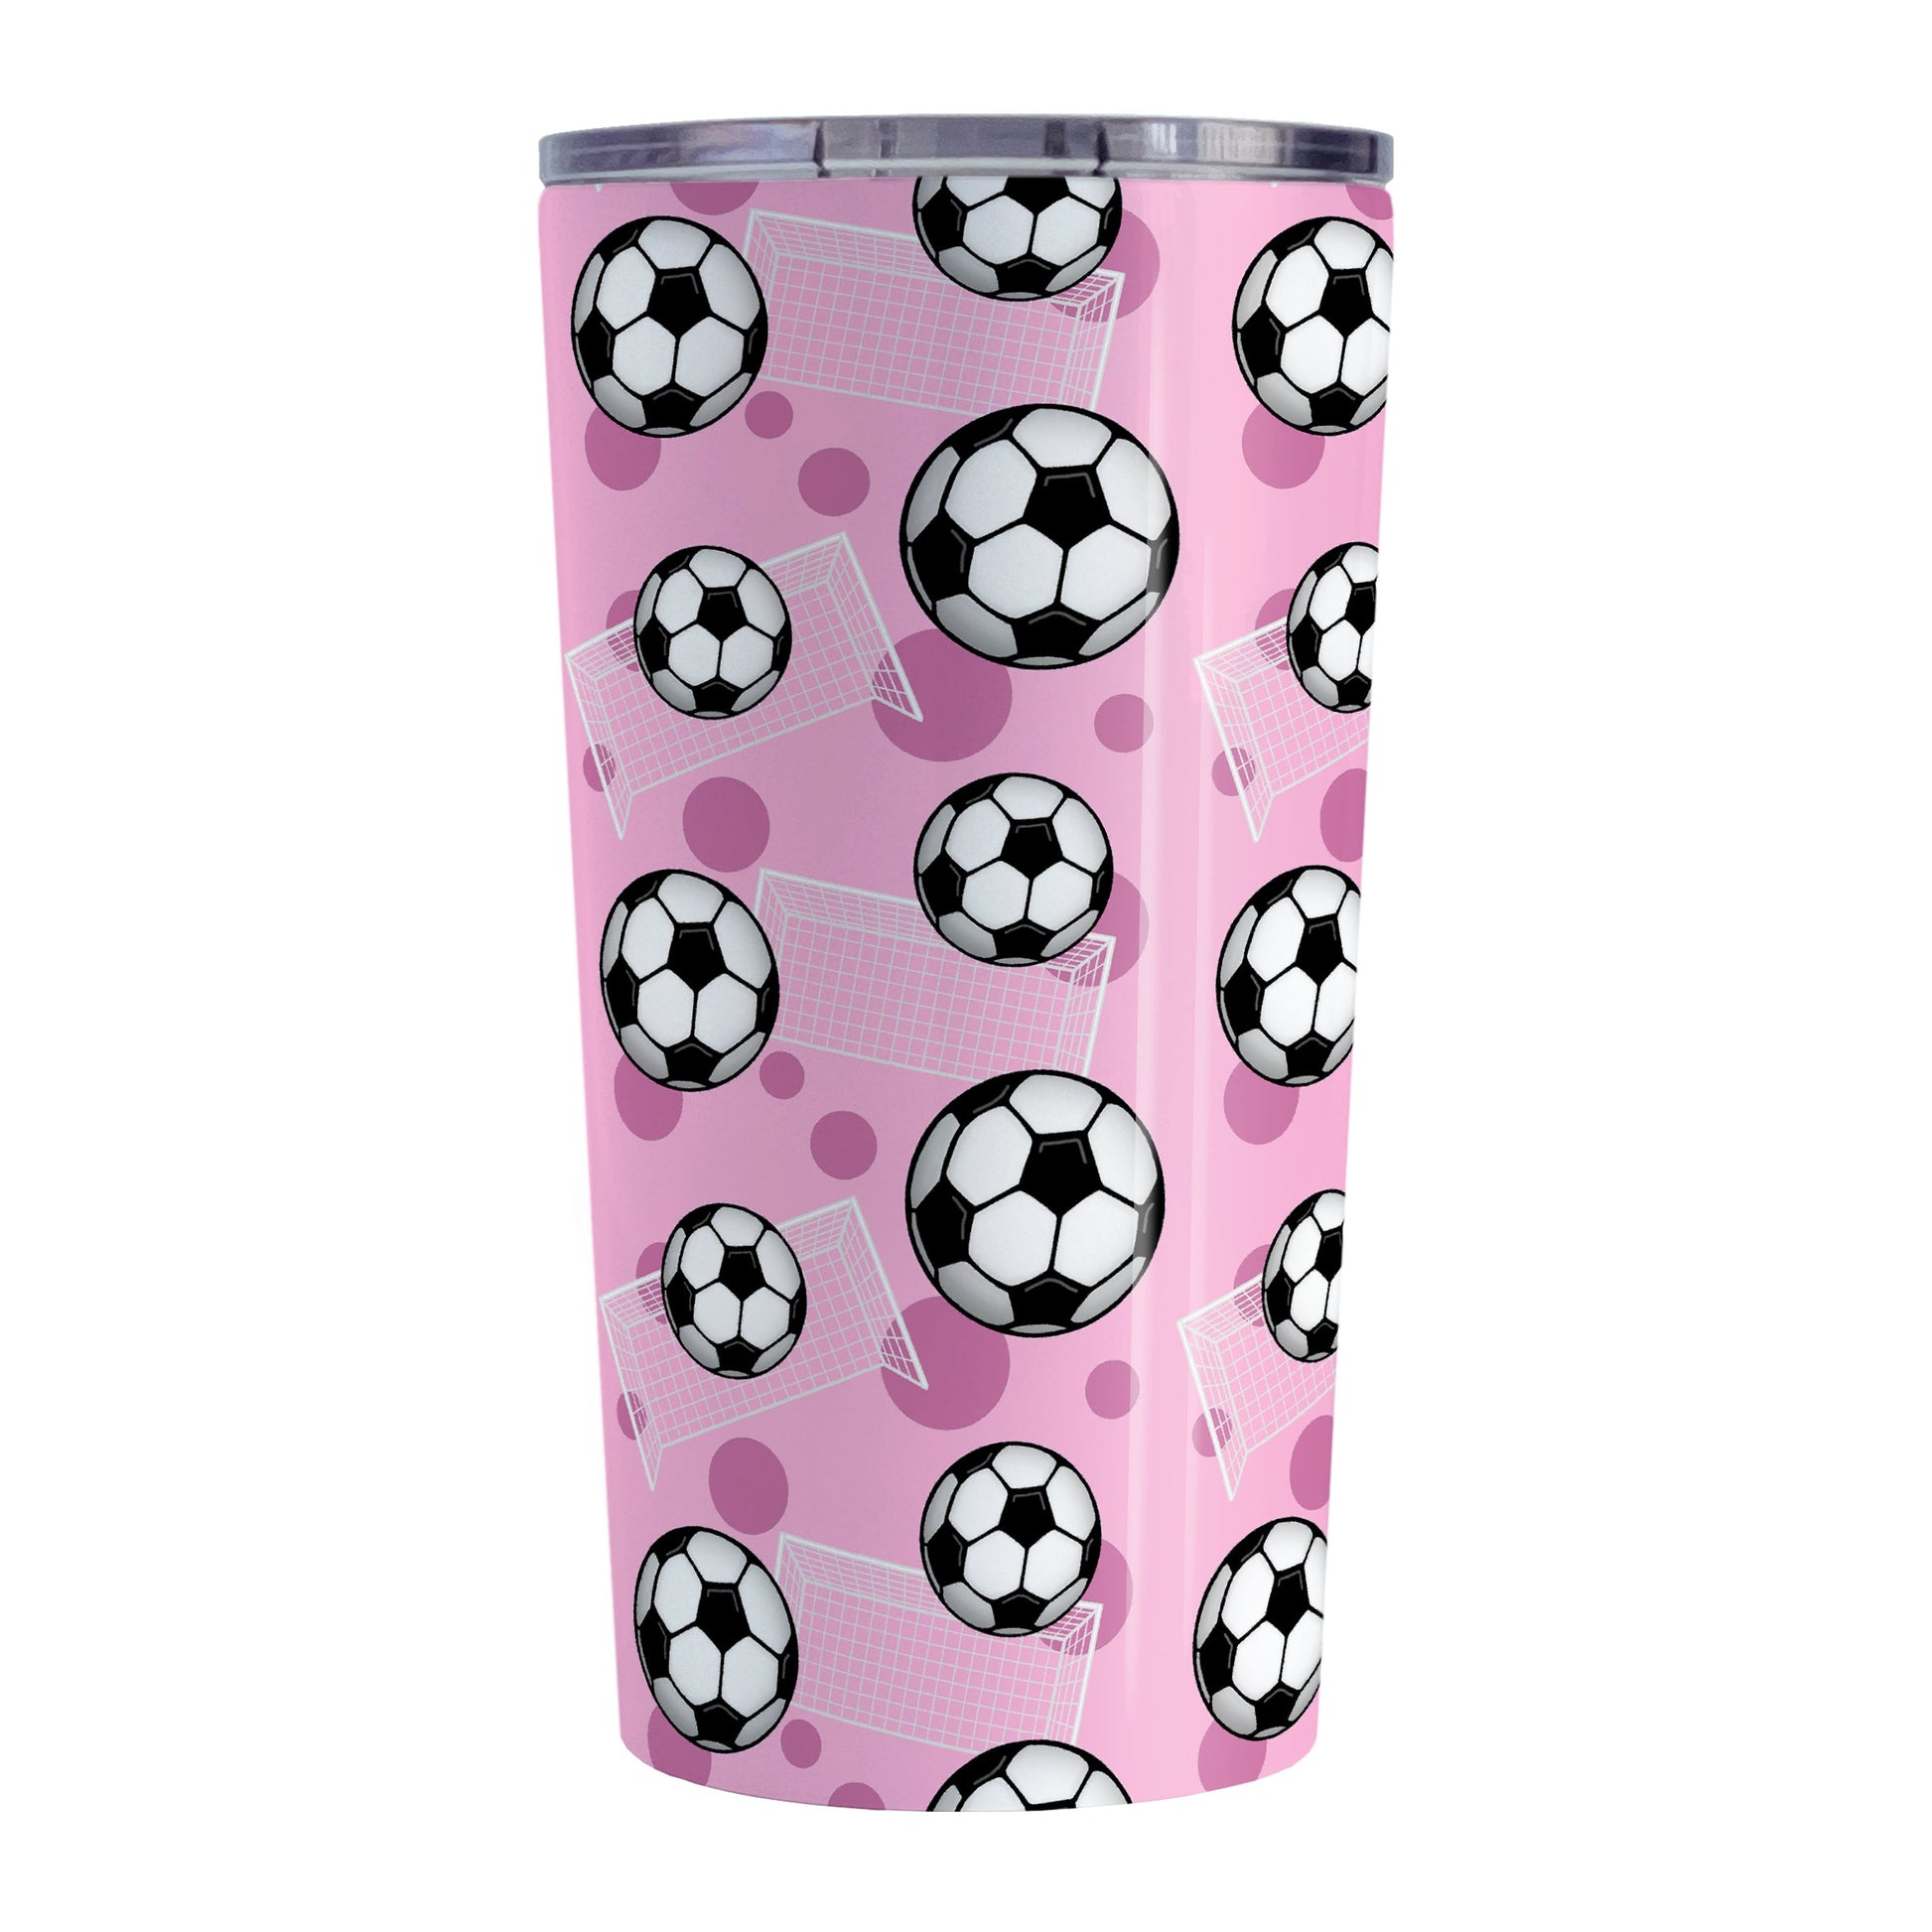 Soccer Ball and Goal Pattern Pink Tumbler Cup (20oz) at Amy's Coffee Mugs. A stainless steel insulated tumbler cup designed with a pattern of soccer balls and goals over a pink background that wraps around the cup. This pink soccer tumbler cup is perfect for people who love or play soccer.